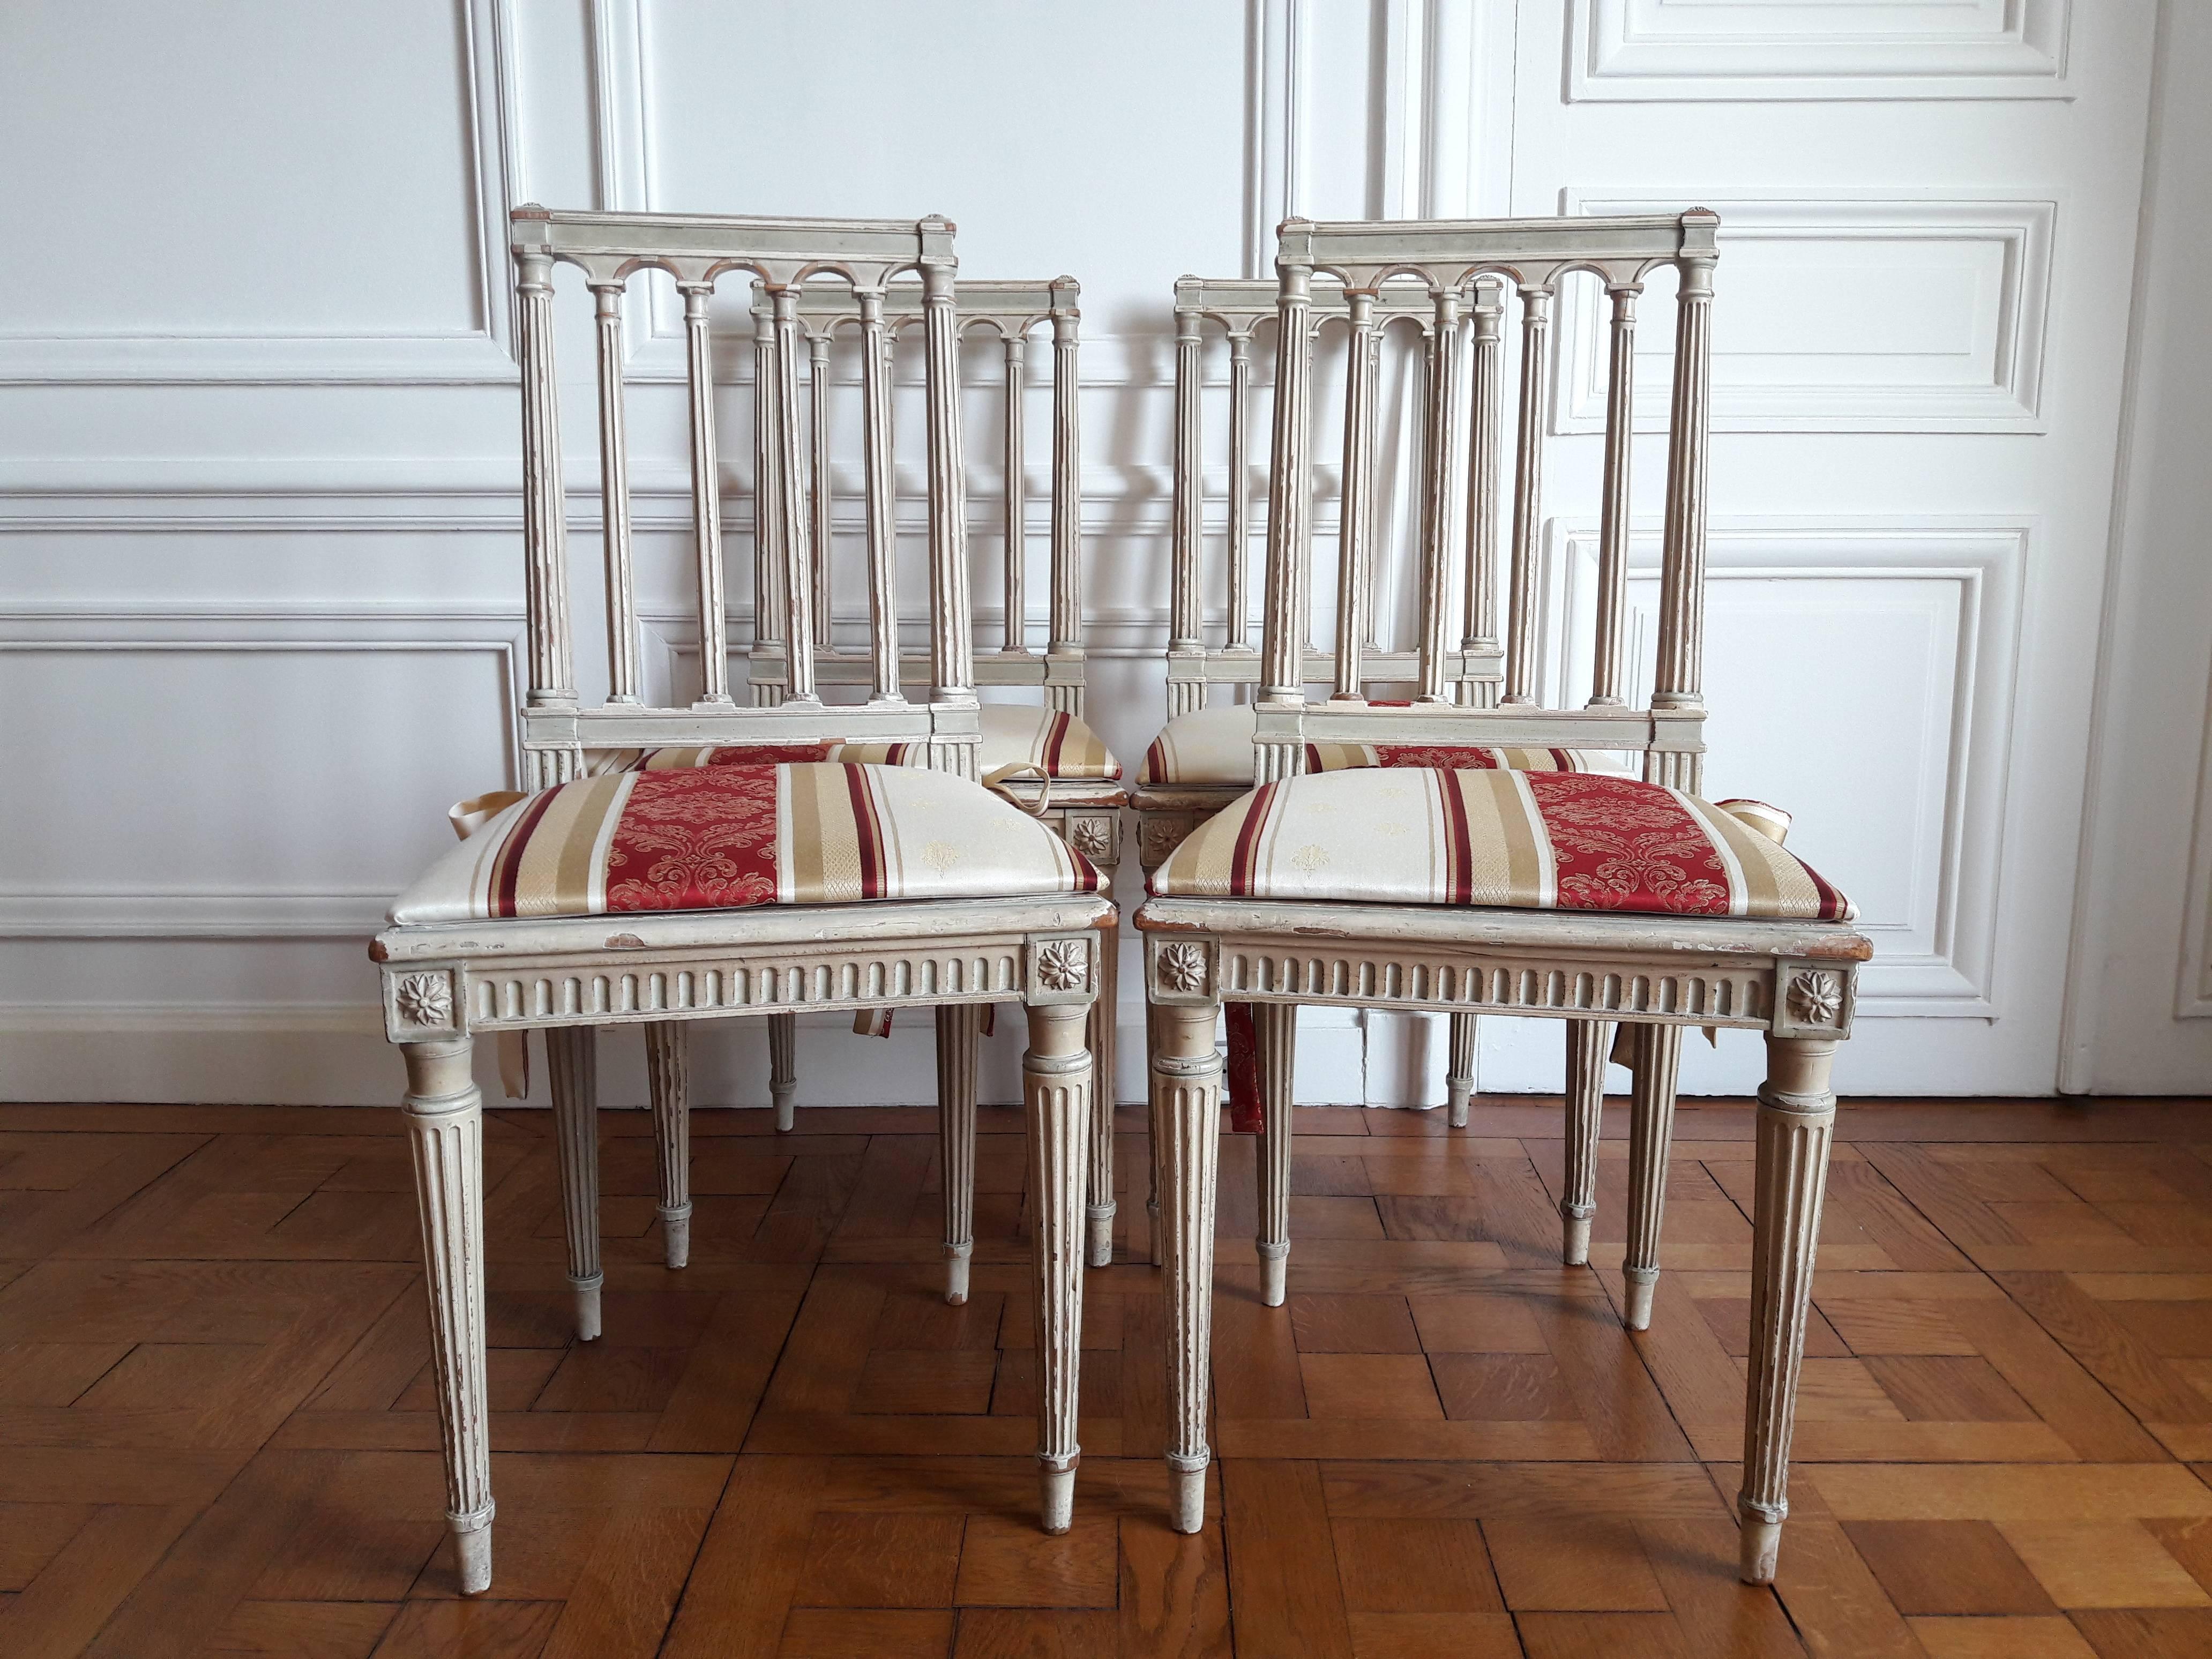 Set of four Louis XVI style chairs. The folders are formed by fluted columns and the seats are caned. 
There are also four sitting tops. The fabric is new, in beige, gold and red tones, with knots made in the same fabric to attach the tops to the